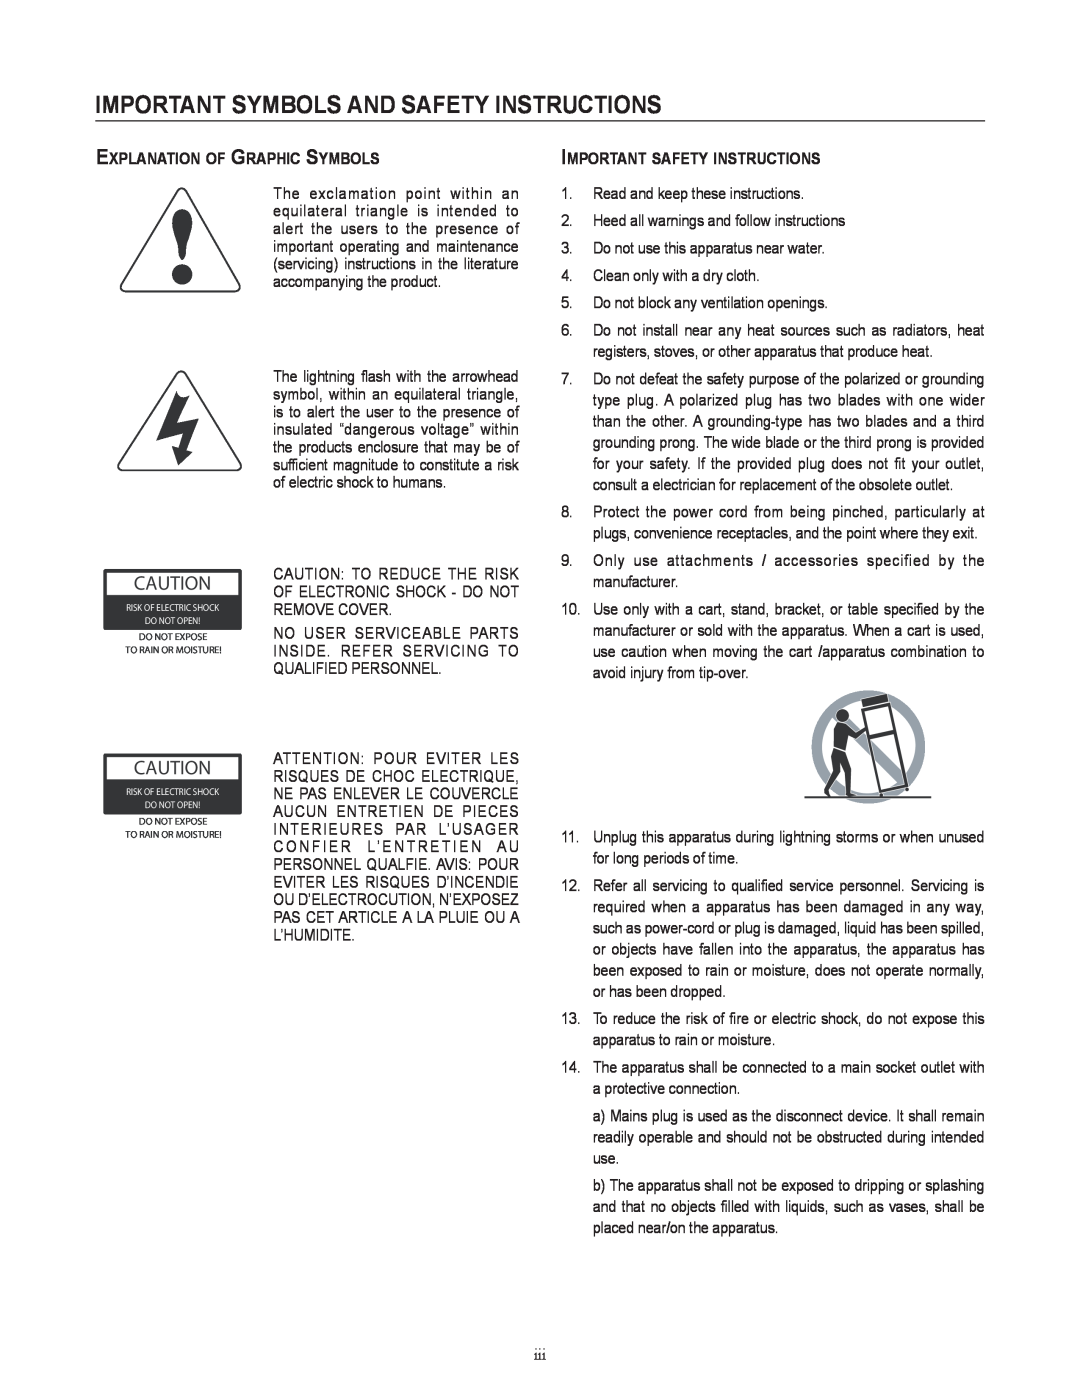 Cerwin-Vega XLS-12S, XLS-15S user manual important symbols and safety instructions, Explanation of Graphic Symbols 